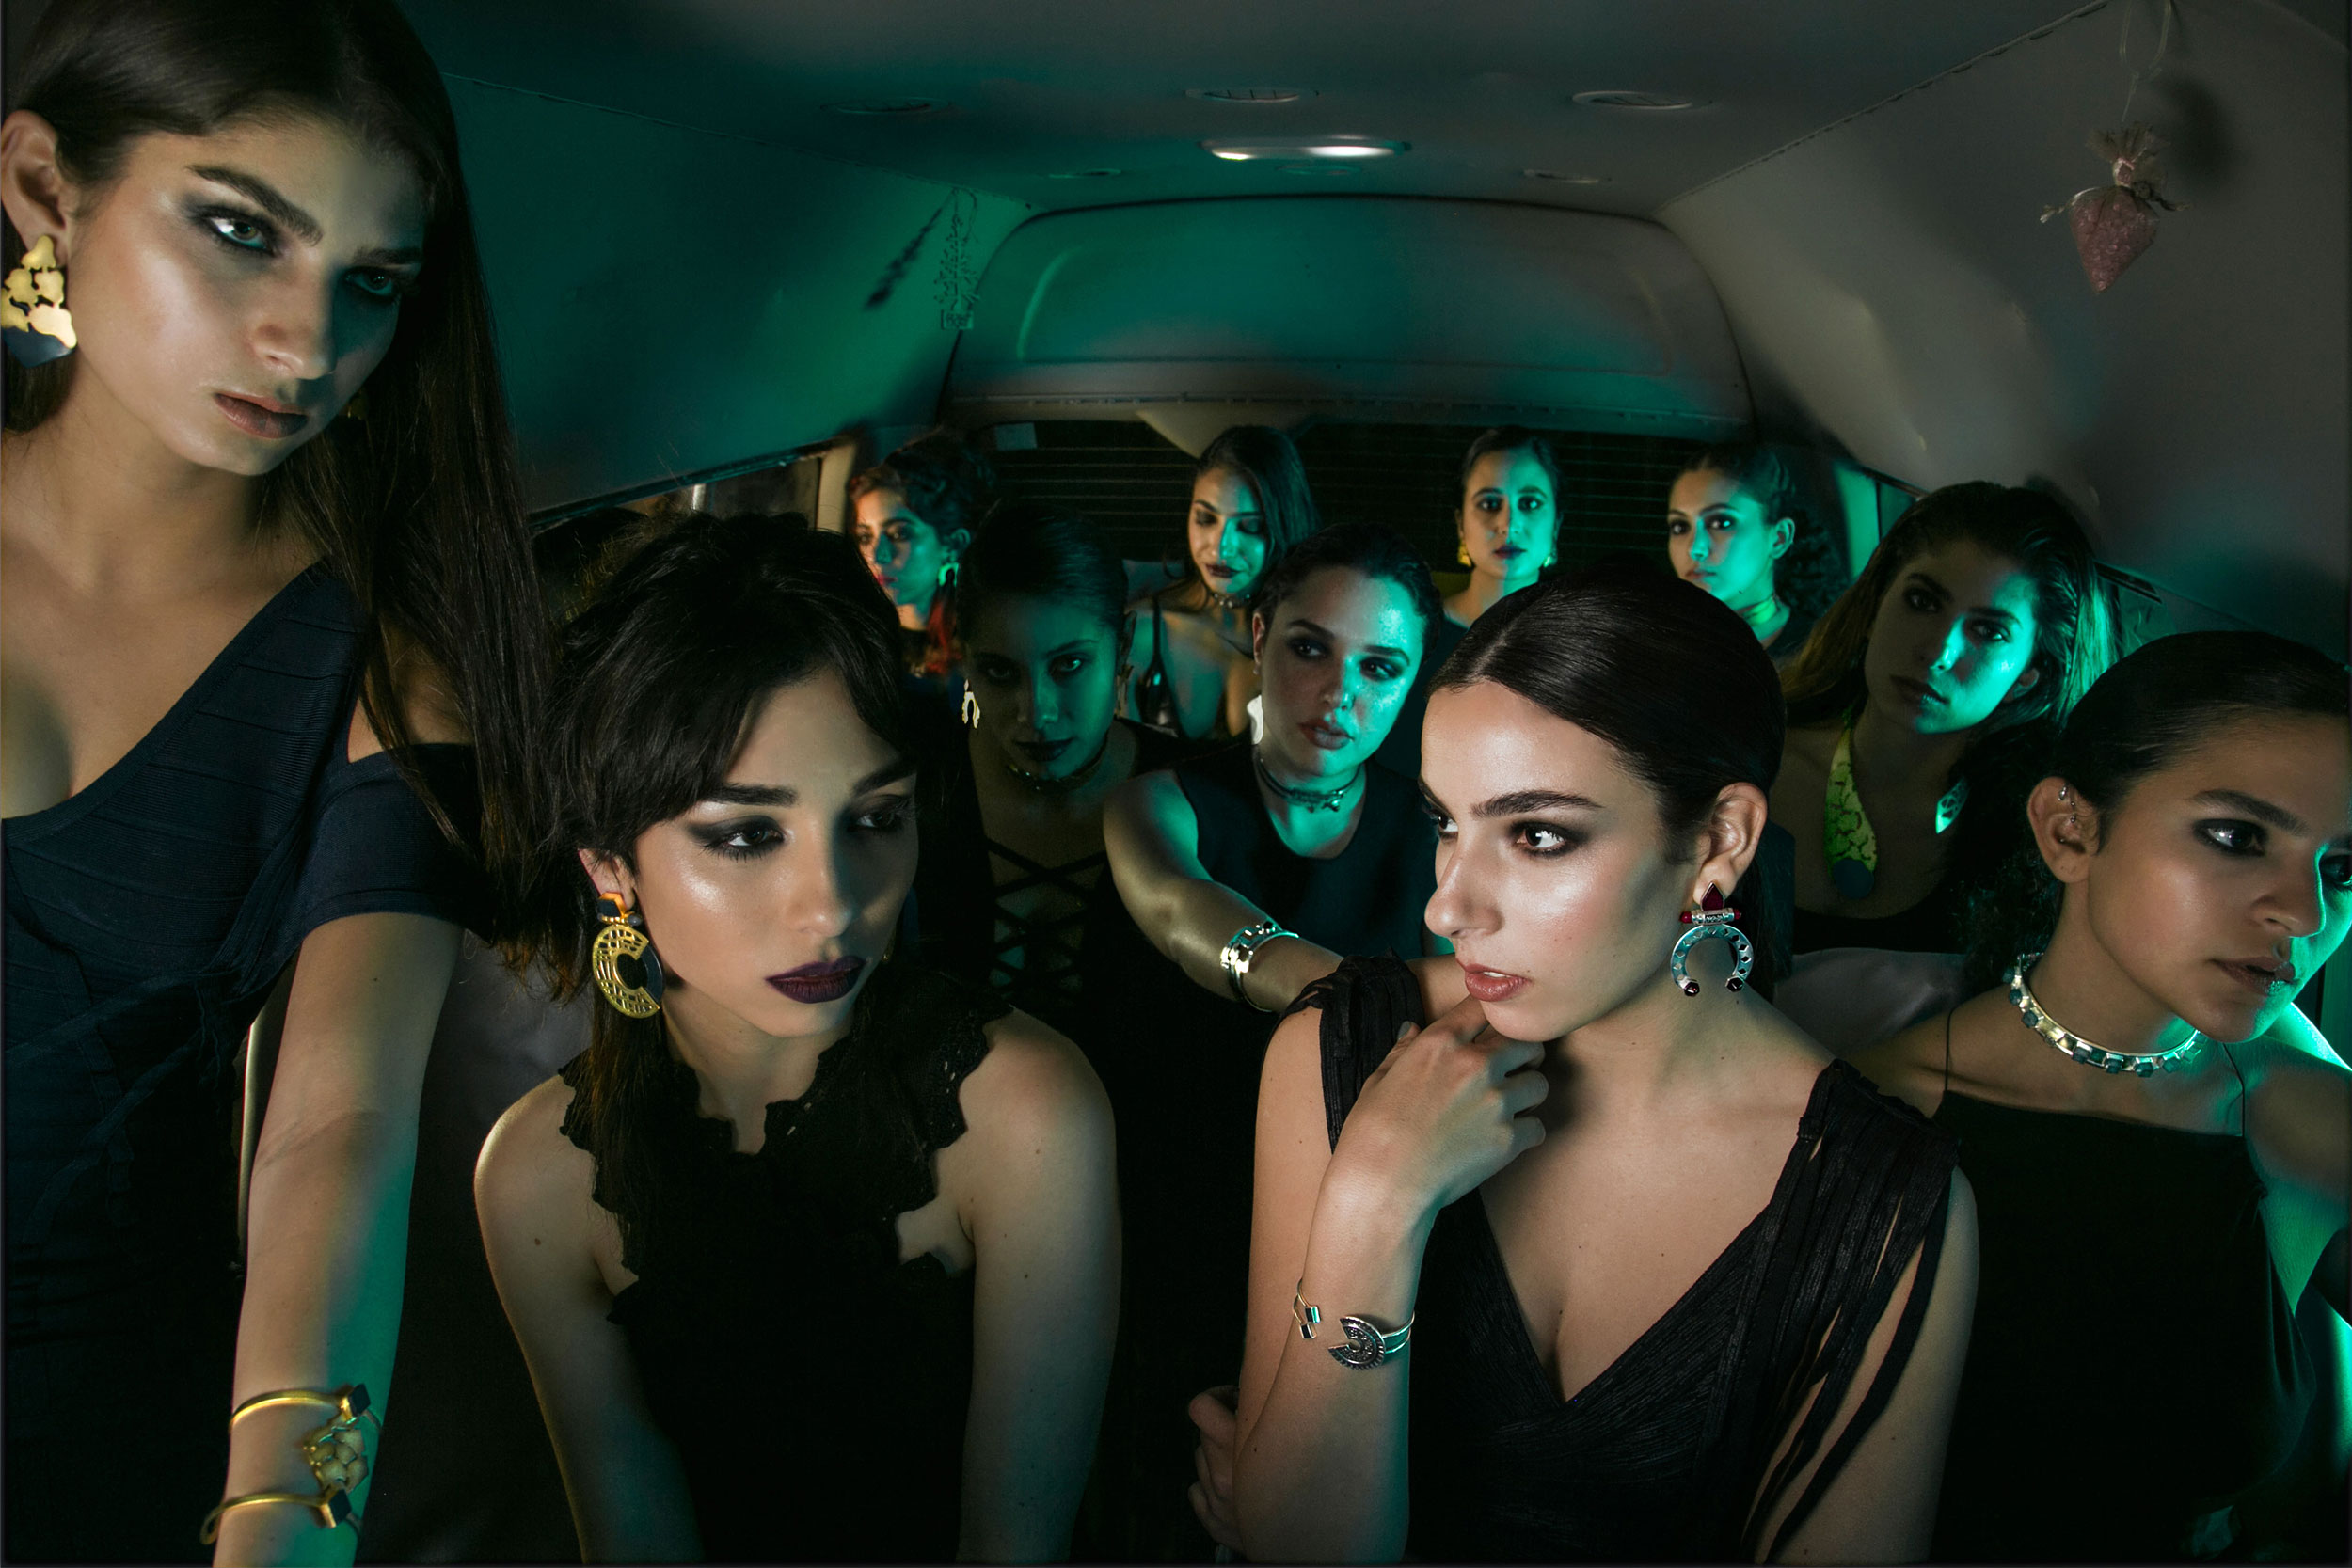 A Microbus Carries Cairo's Fiercest Working Women into the Night in Edgy New Fashion Campaign